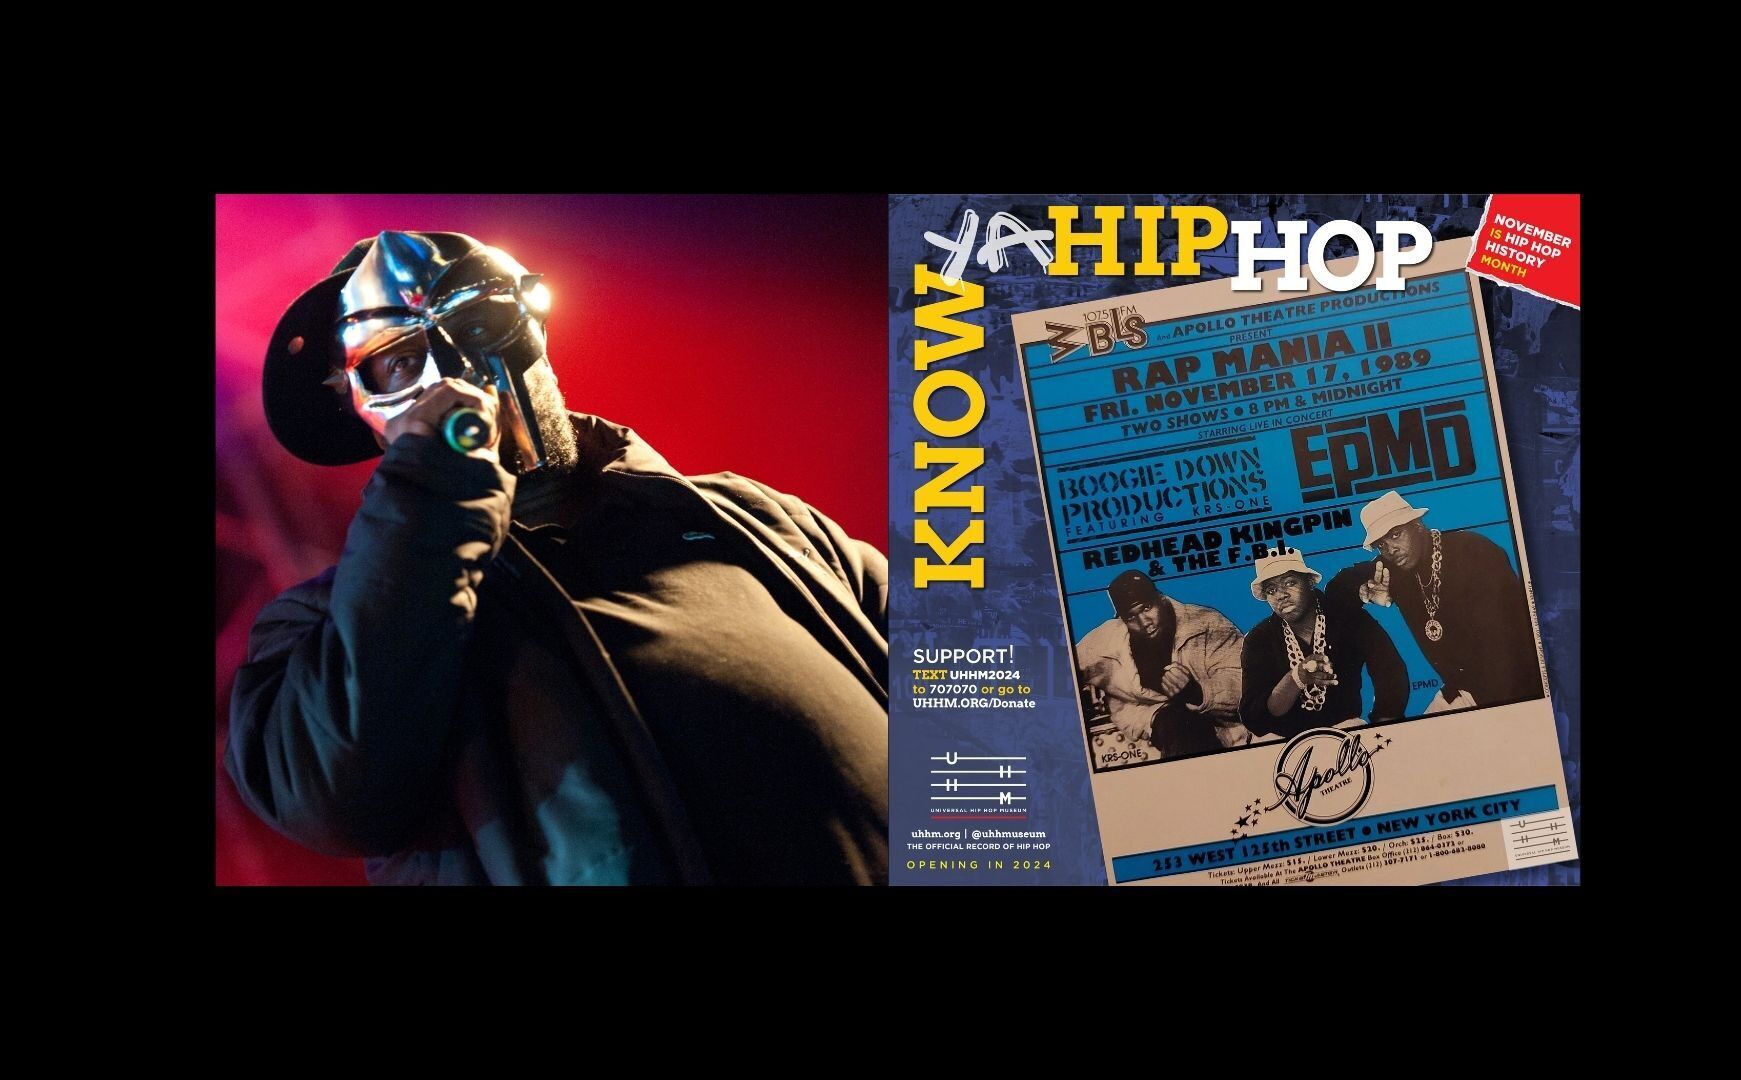 KNOW YA HIP HOP: MF DOOM, EPMD, And Boogie Down Production